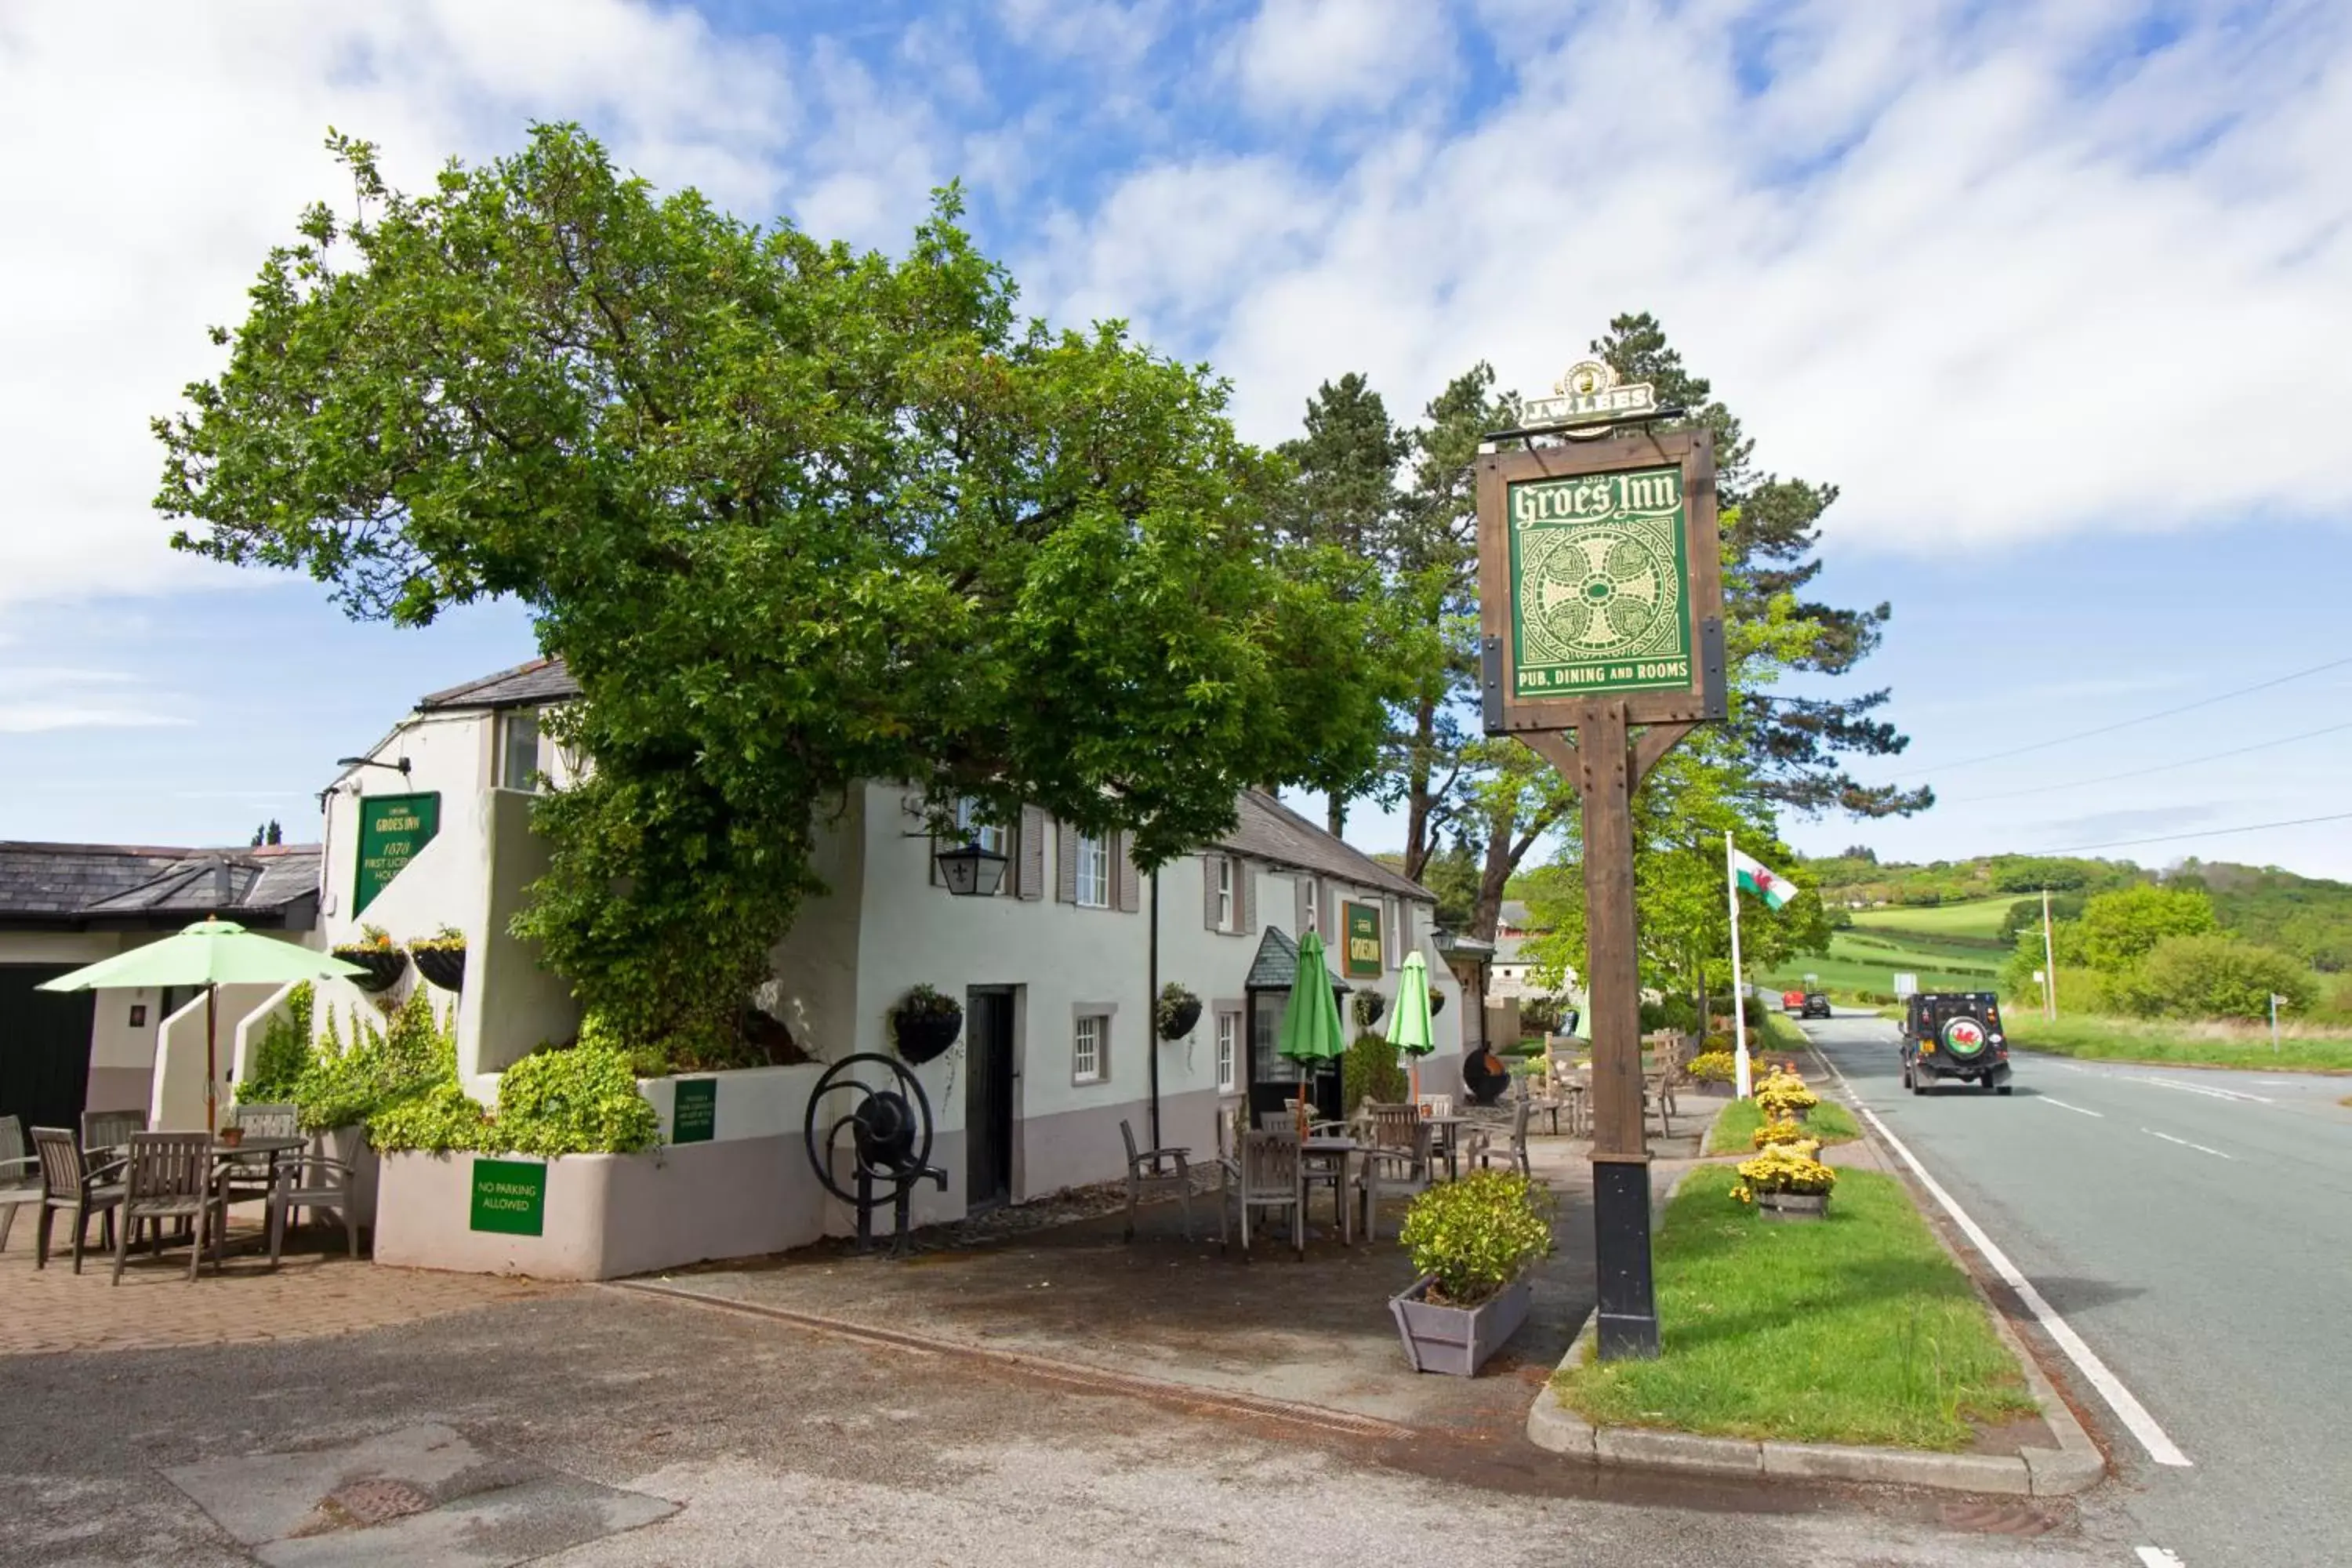 Property building in The Groes Inn